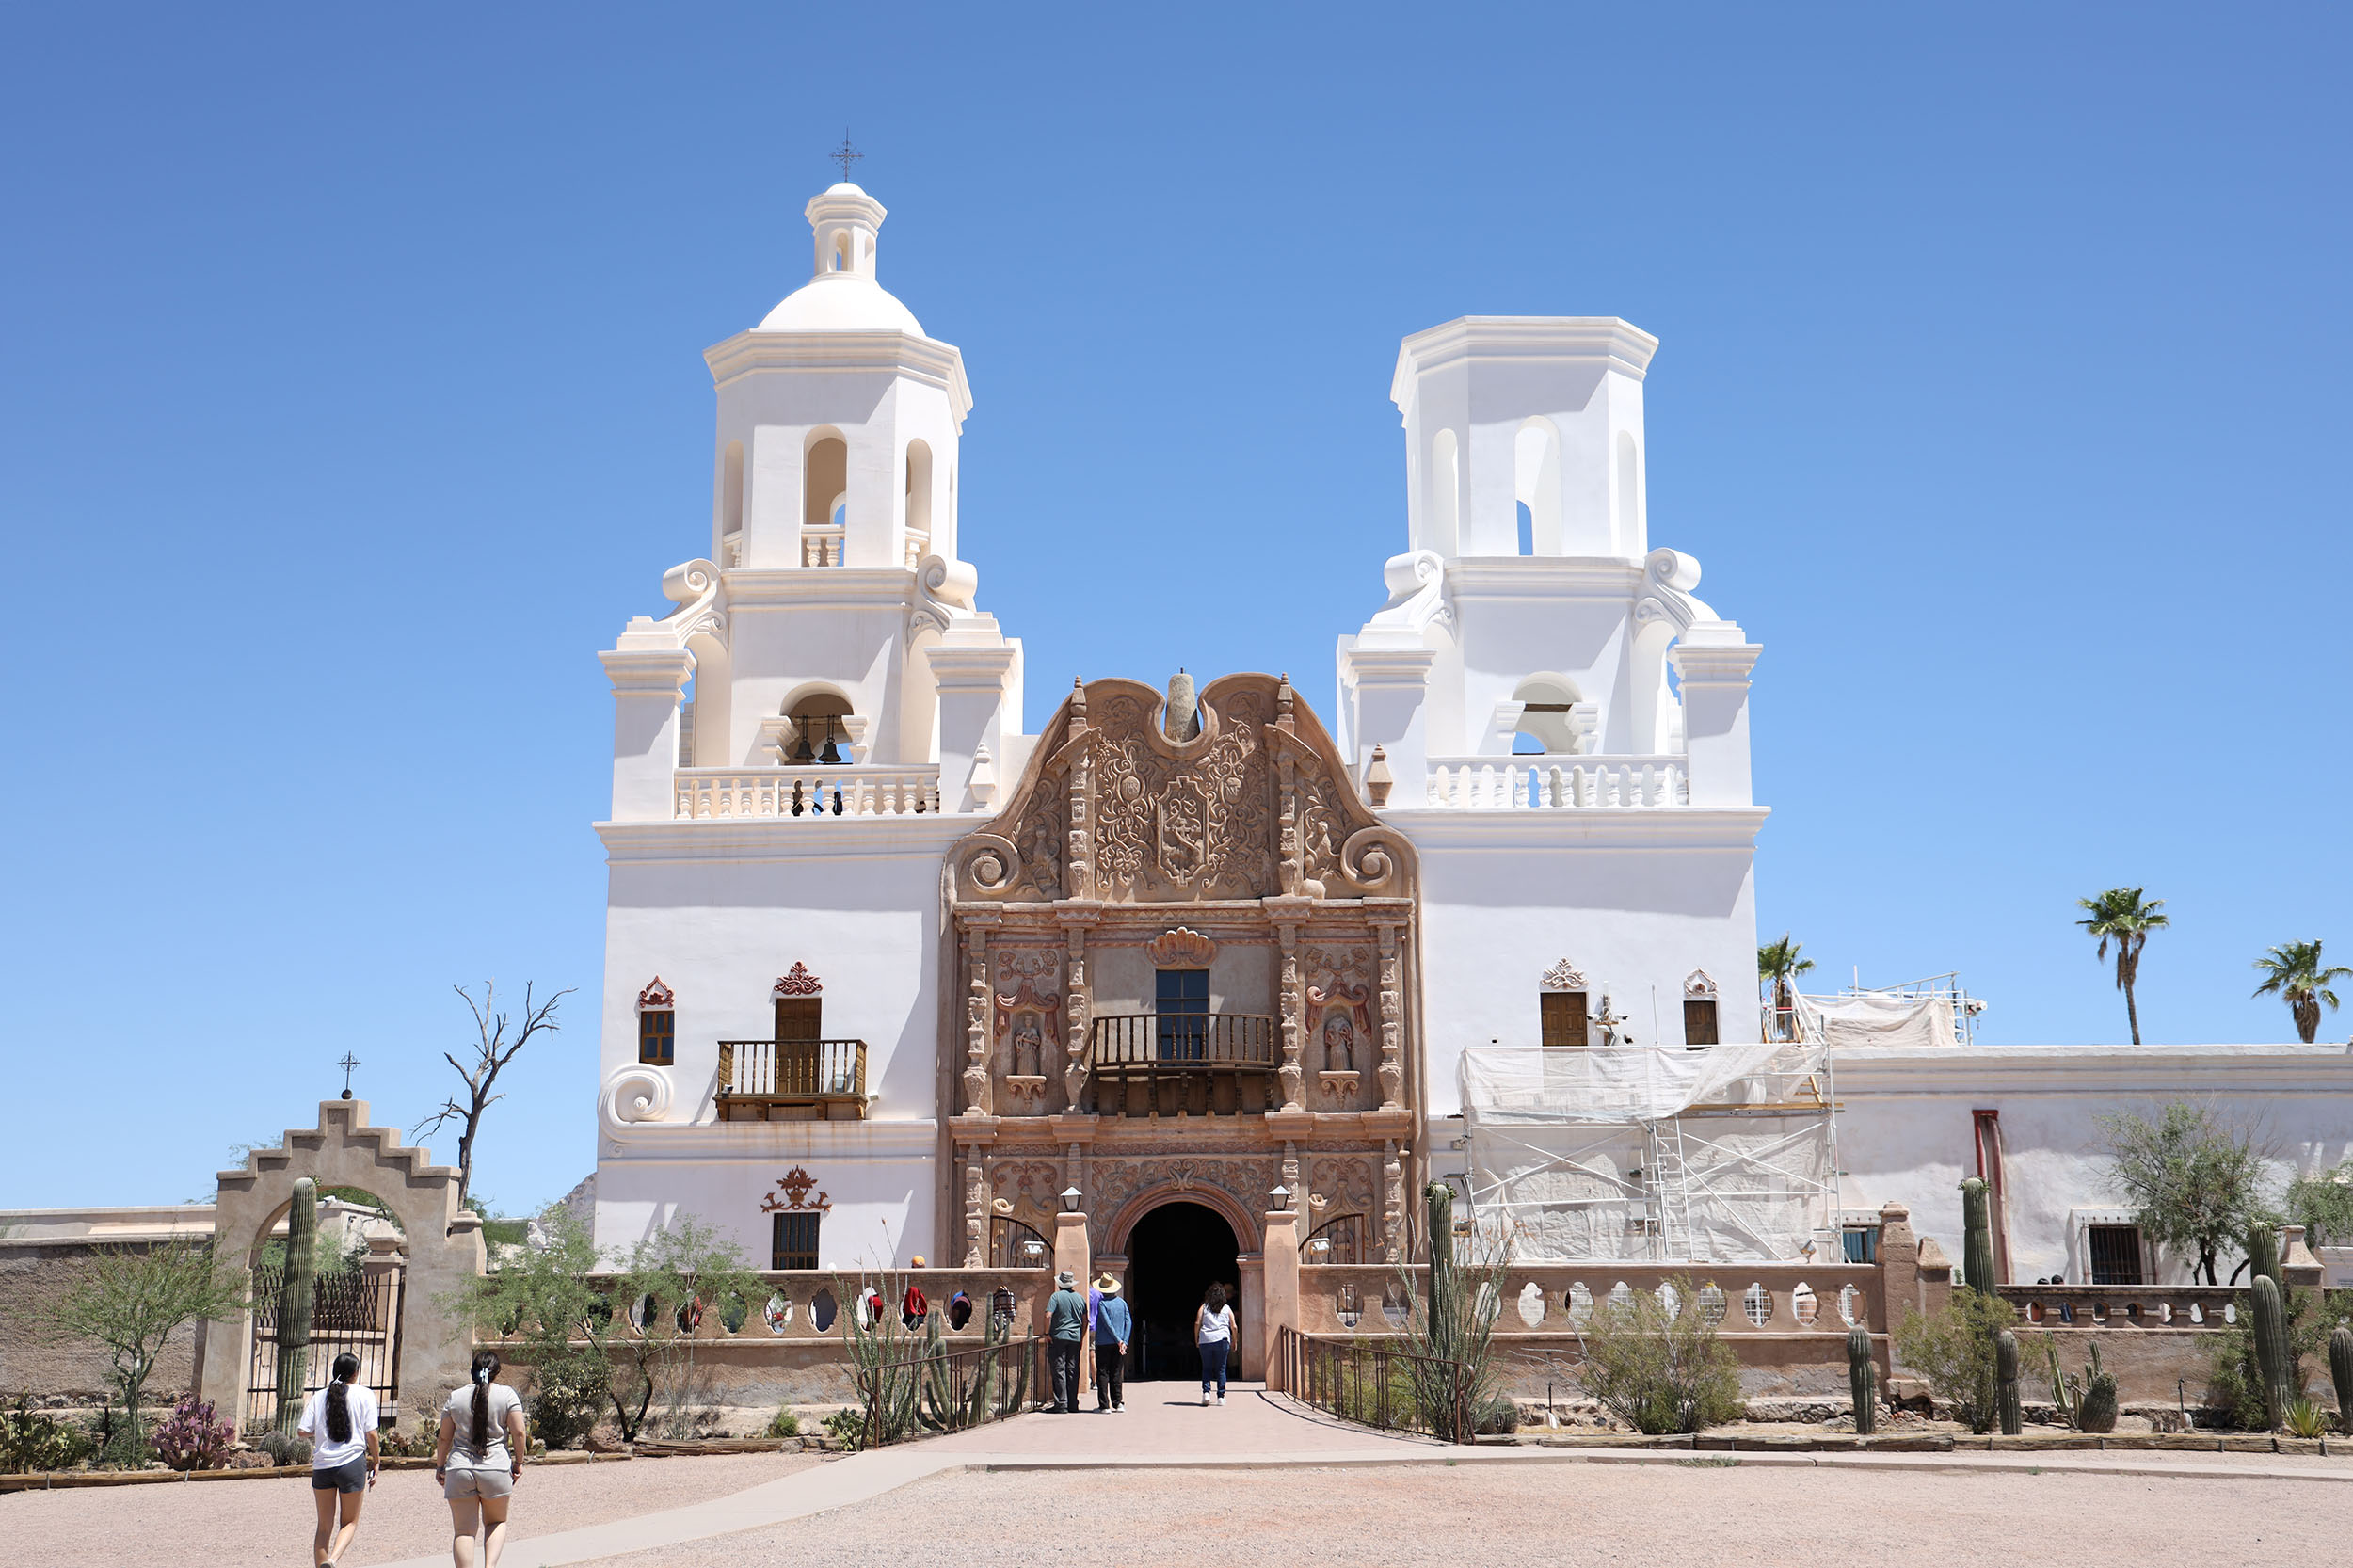 The front of the Mission San Xavier del Bac